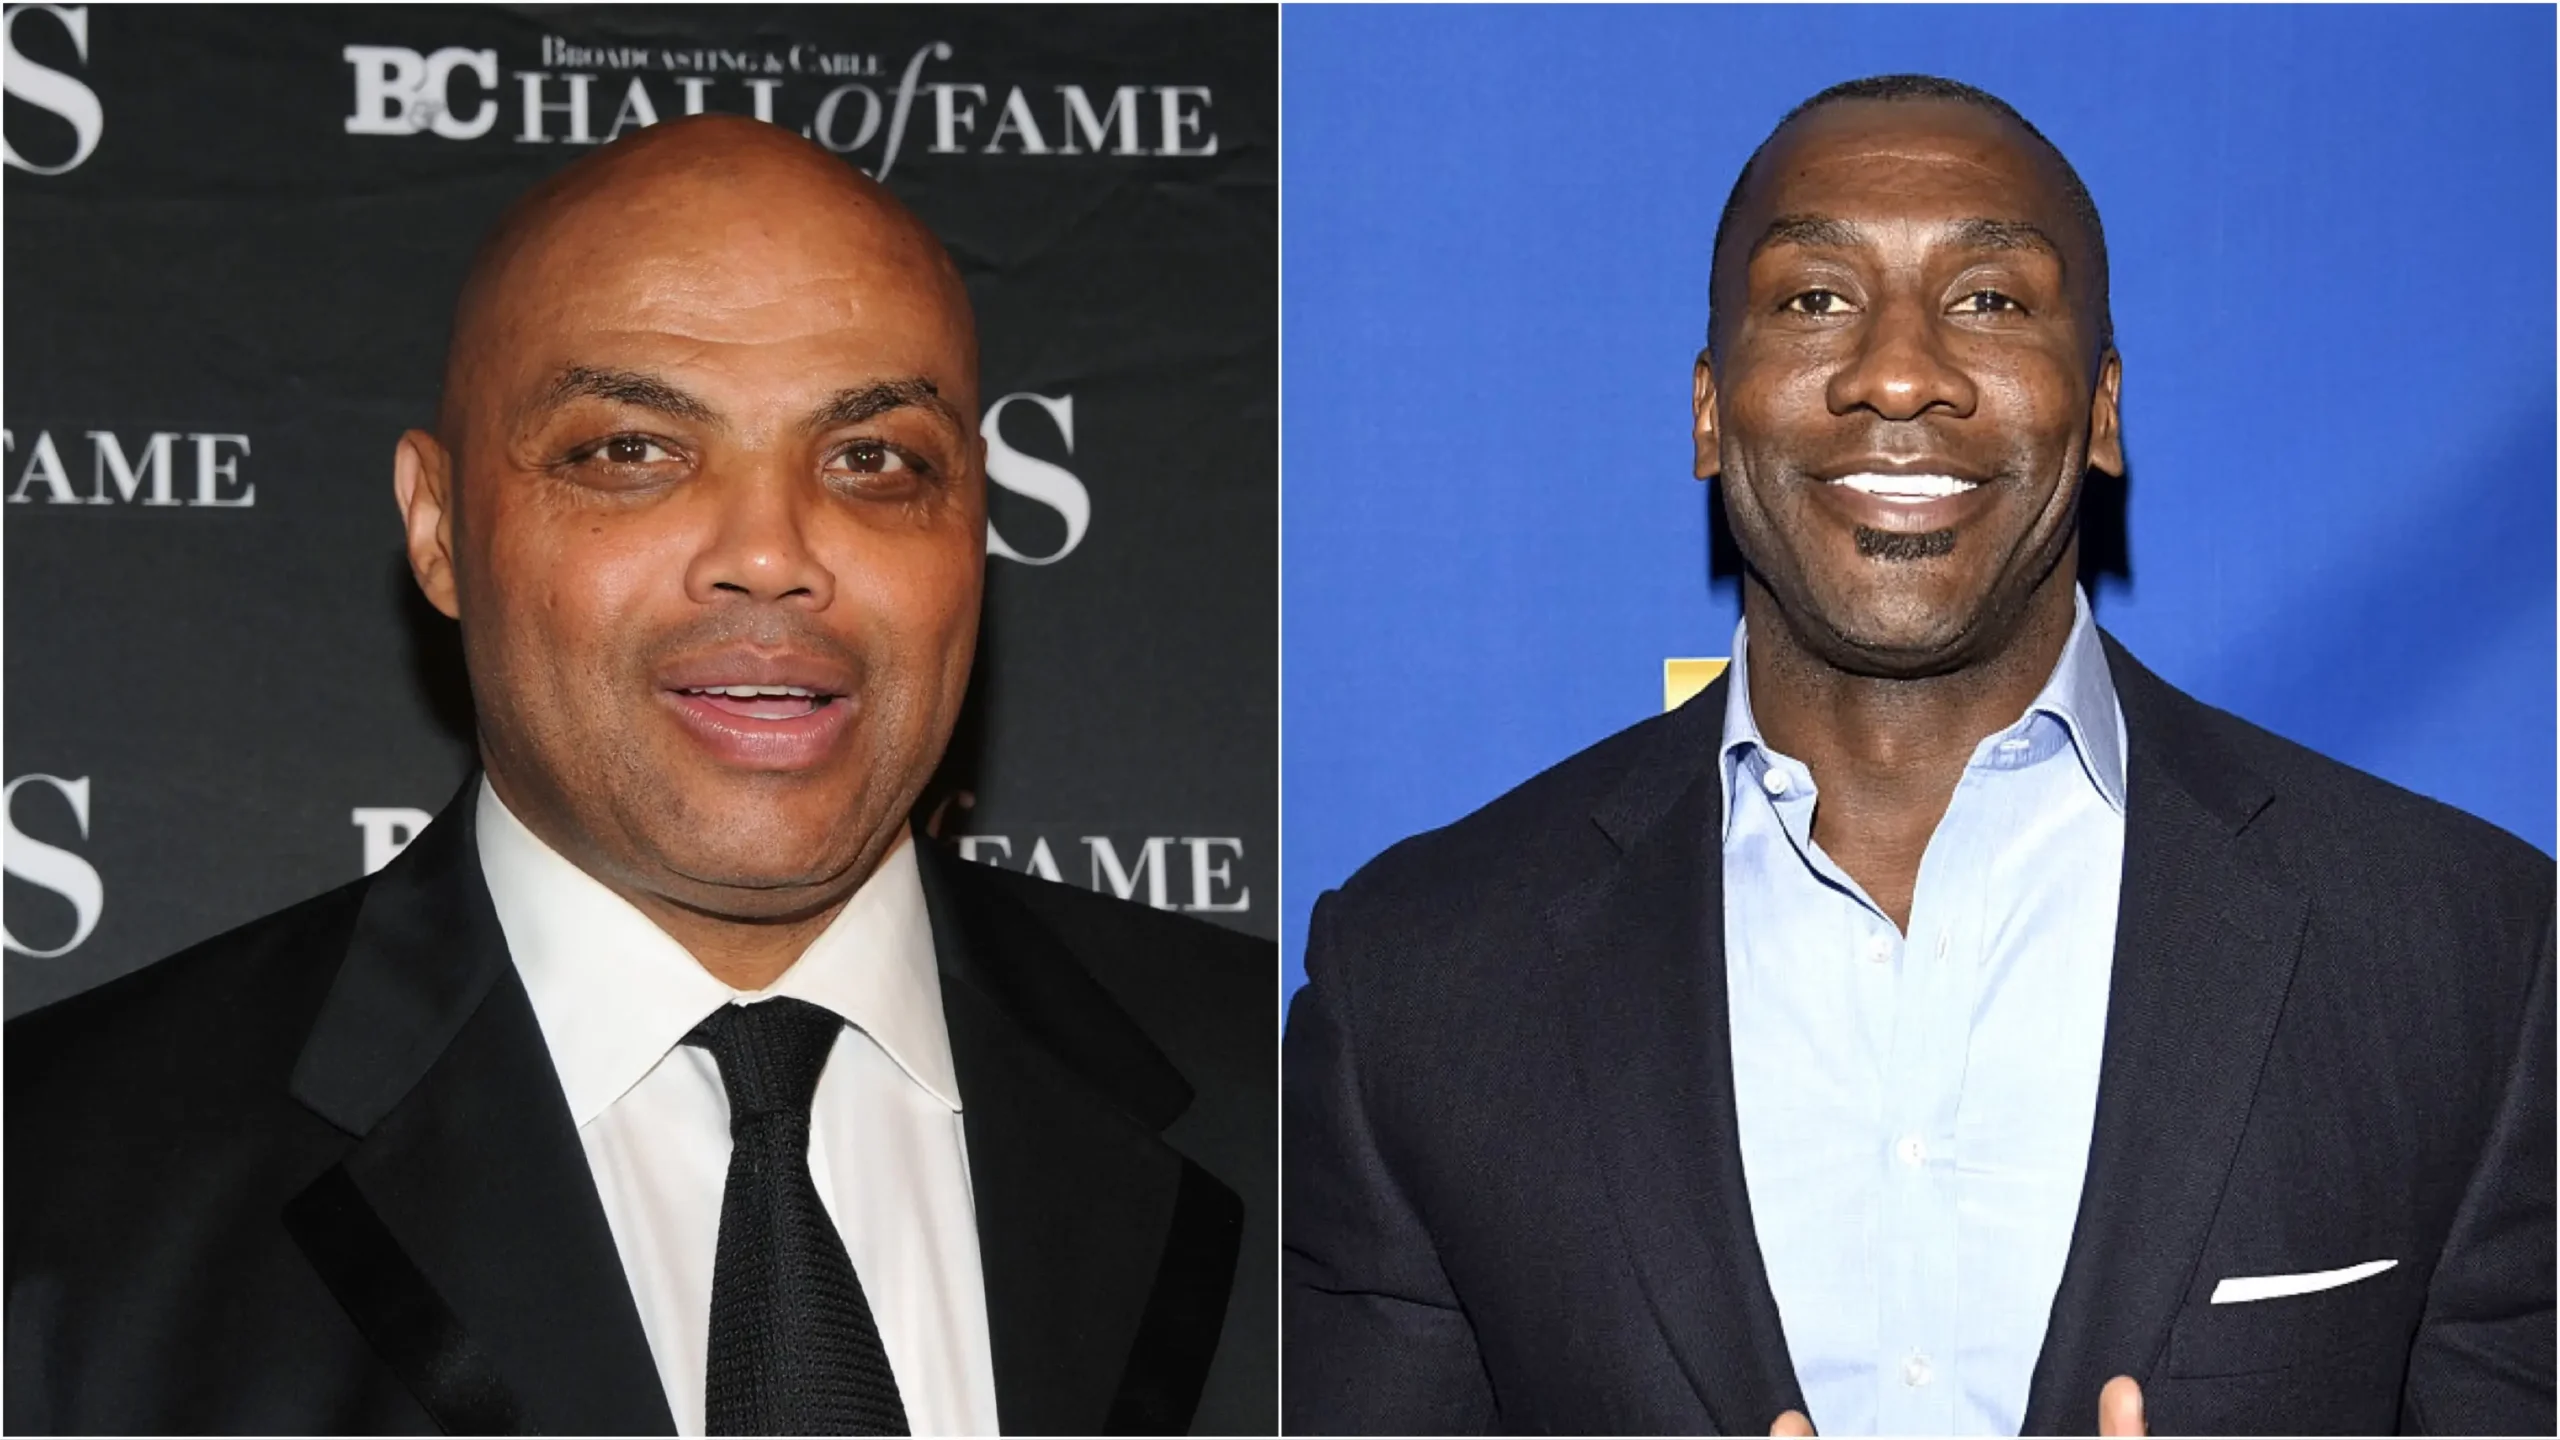 Shannon Sharpe Plays Therapist as Charles Barkley Recounts How His Deadbeat Dad Flew Across the Country and Cussed Him Out for Flunking Spanish and Unable to Graduate